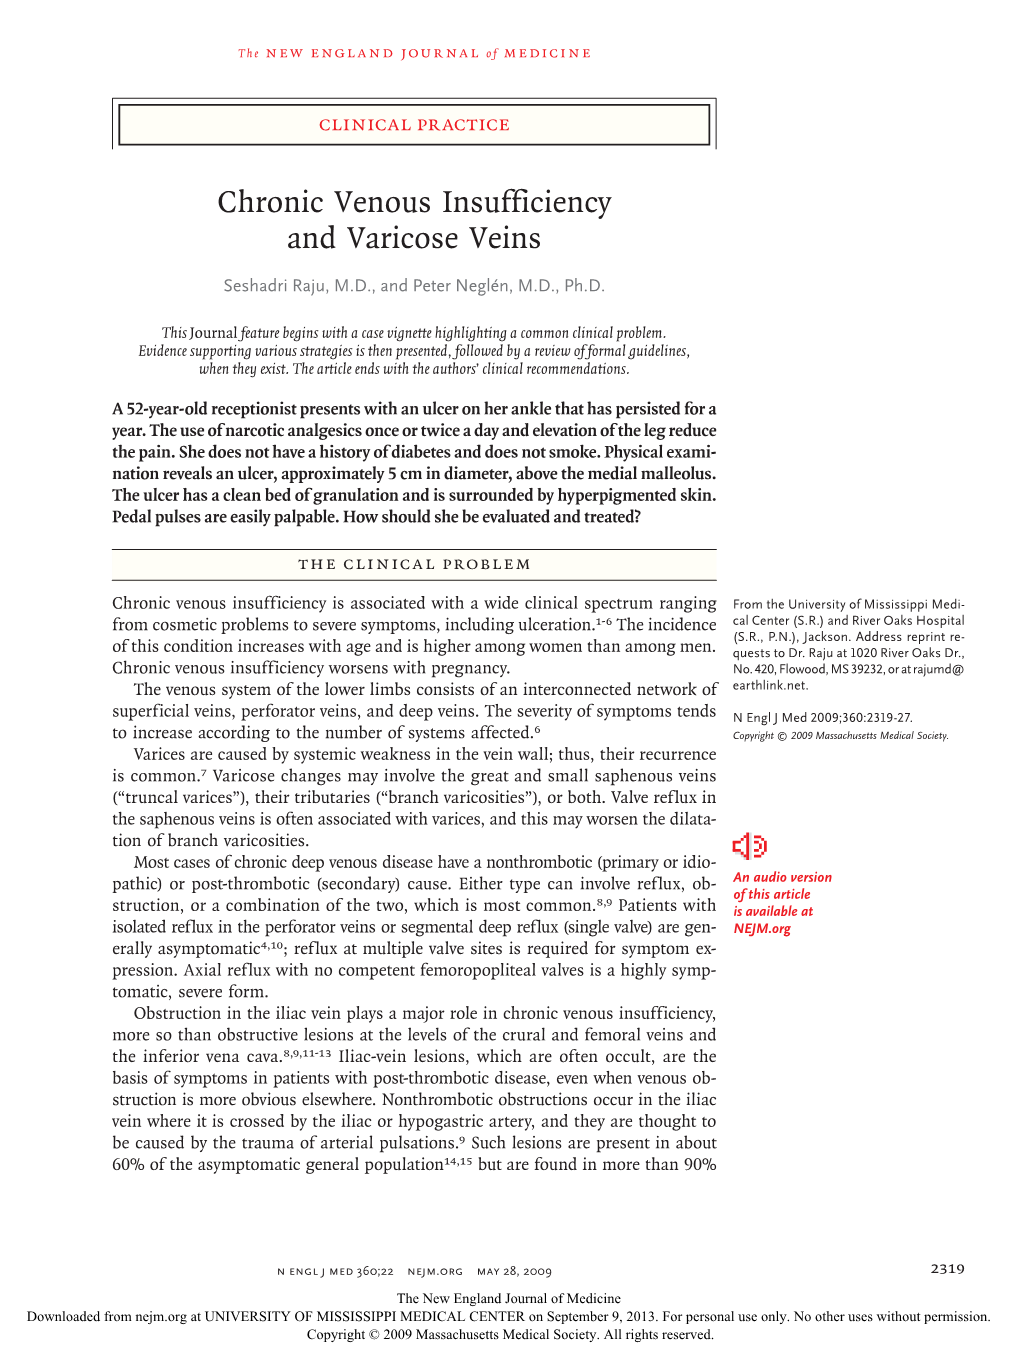 Chronic Venous Insufficiency and Varicose Veins